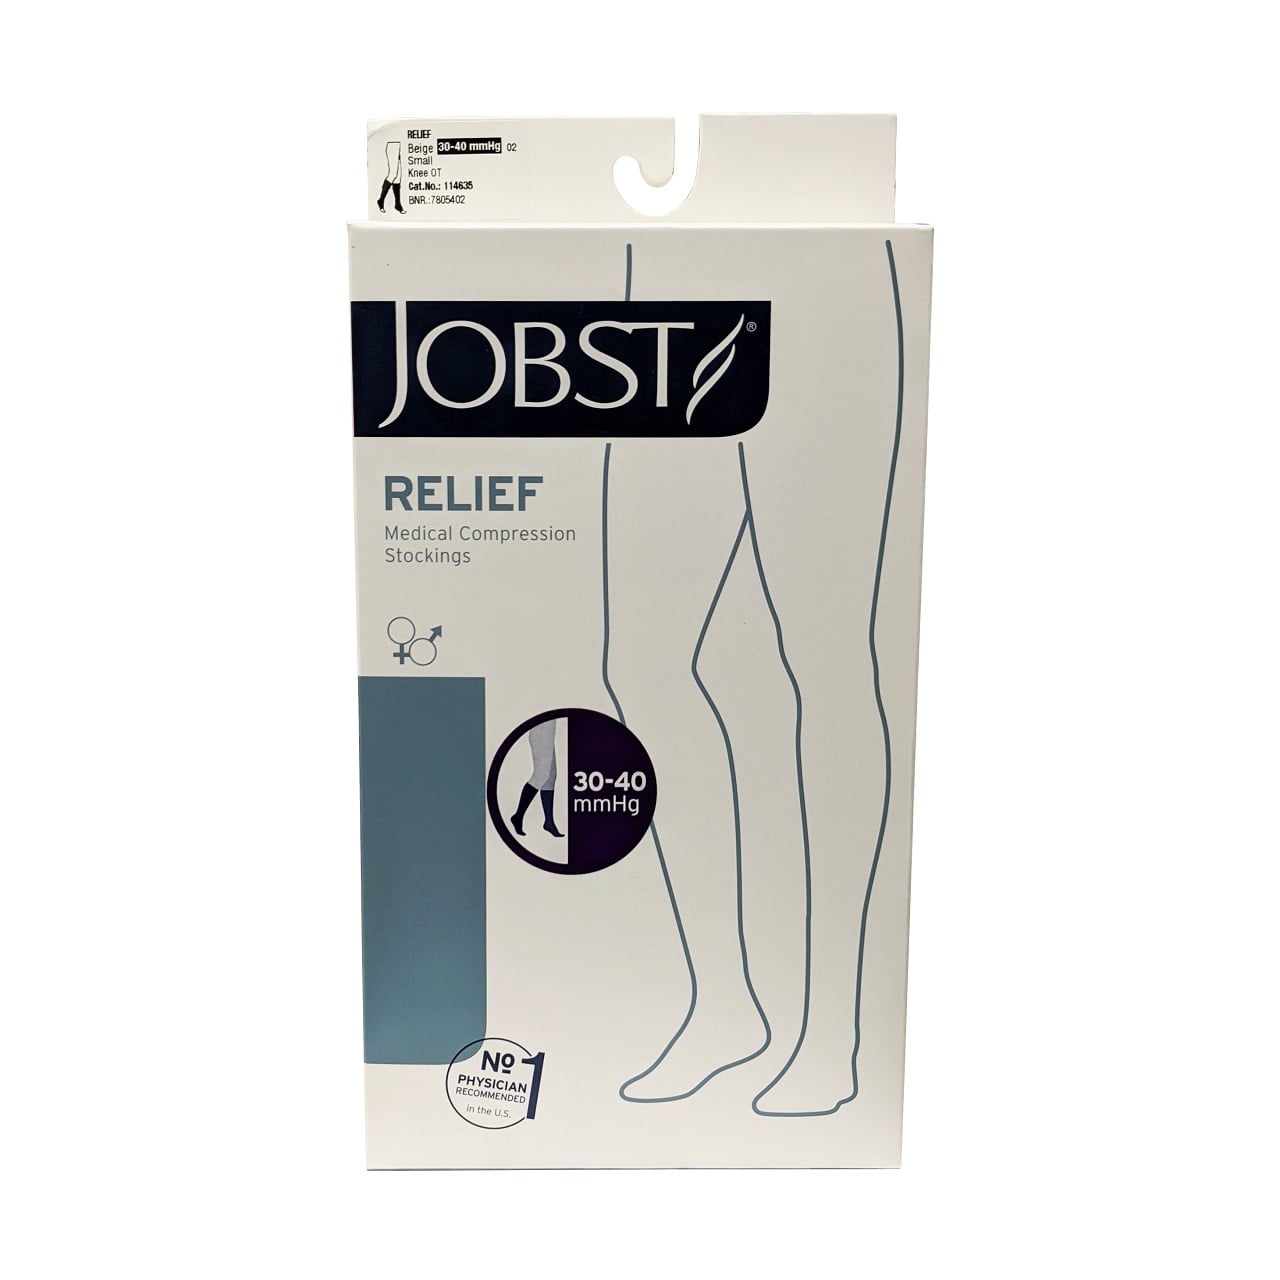 Product label for Jobst Relief Compression Stockings 30-40 mmHg - Knee High / Open Toe / Beige (Small)